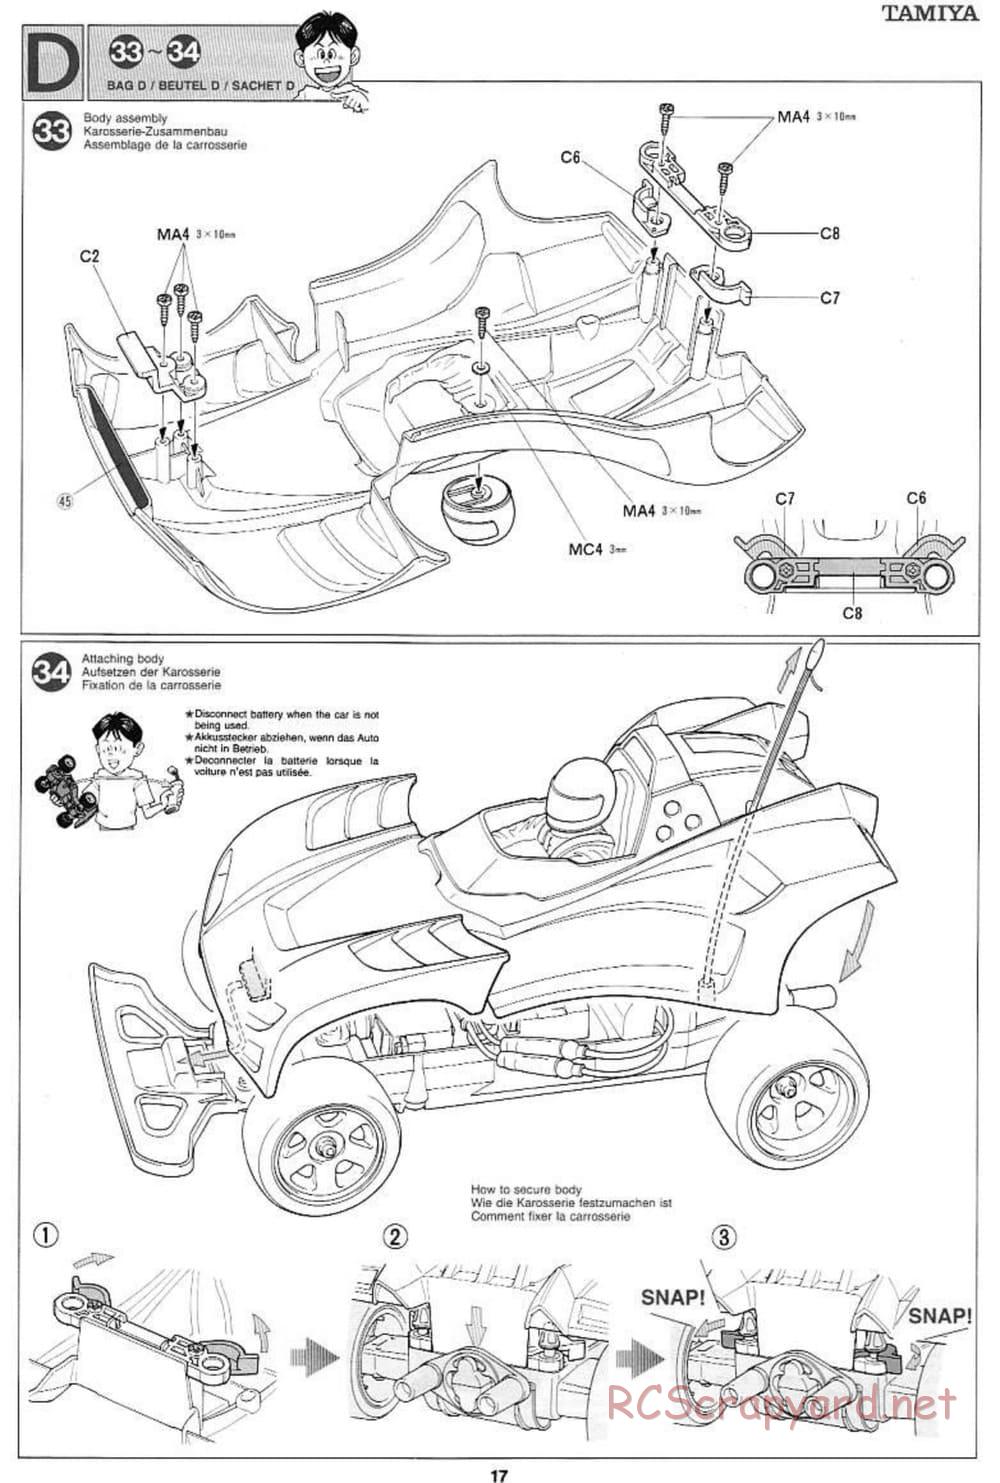 Tamiya - Voltec Fighter - Boy's 4WD Chassis - Manual - Page 17